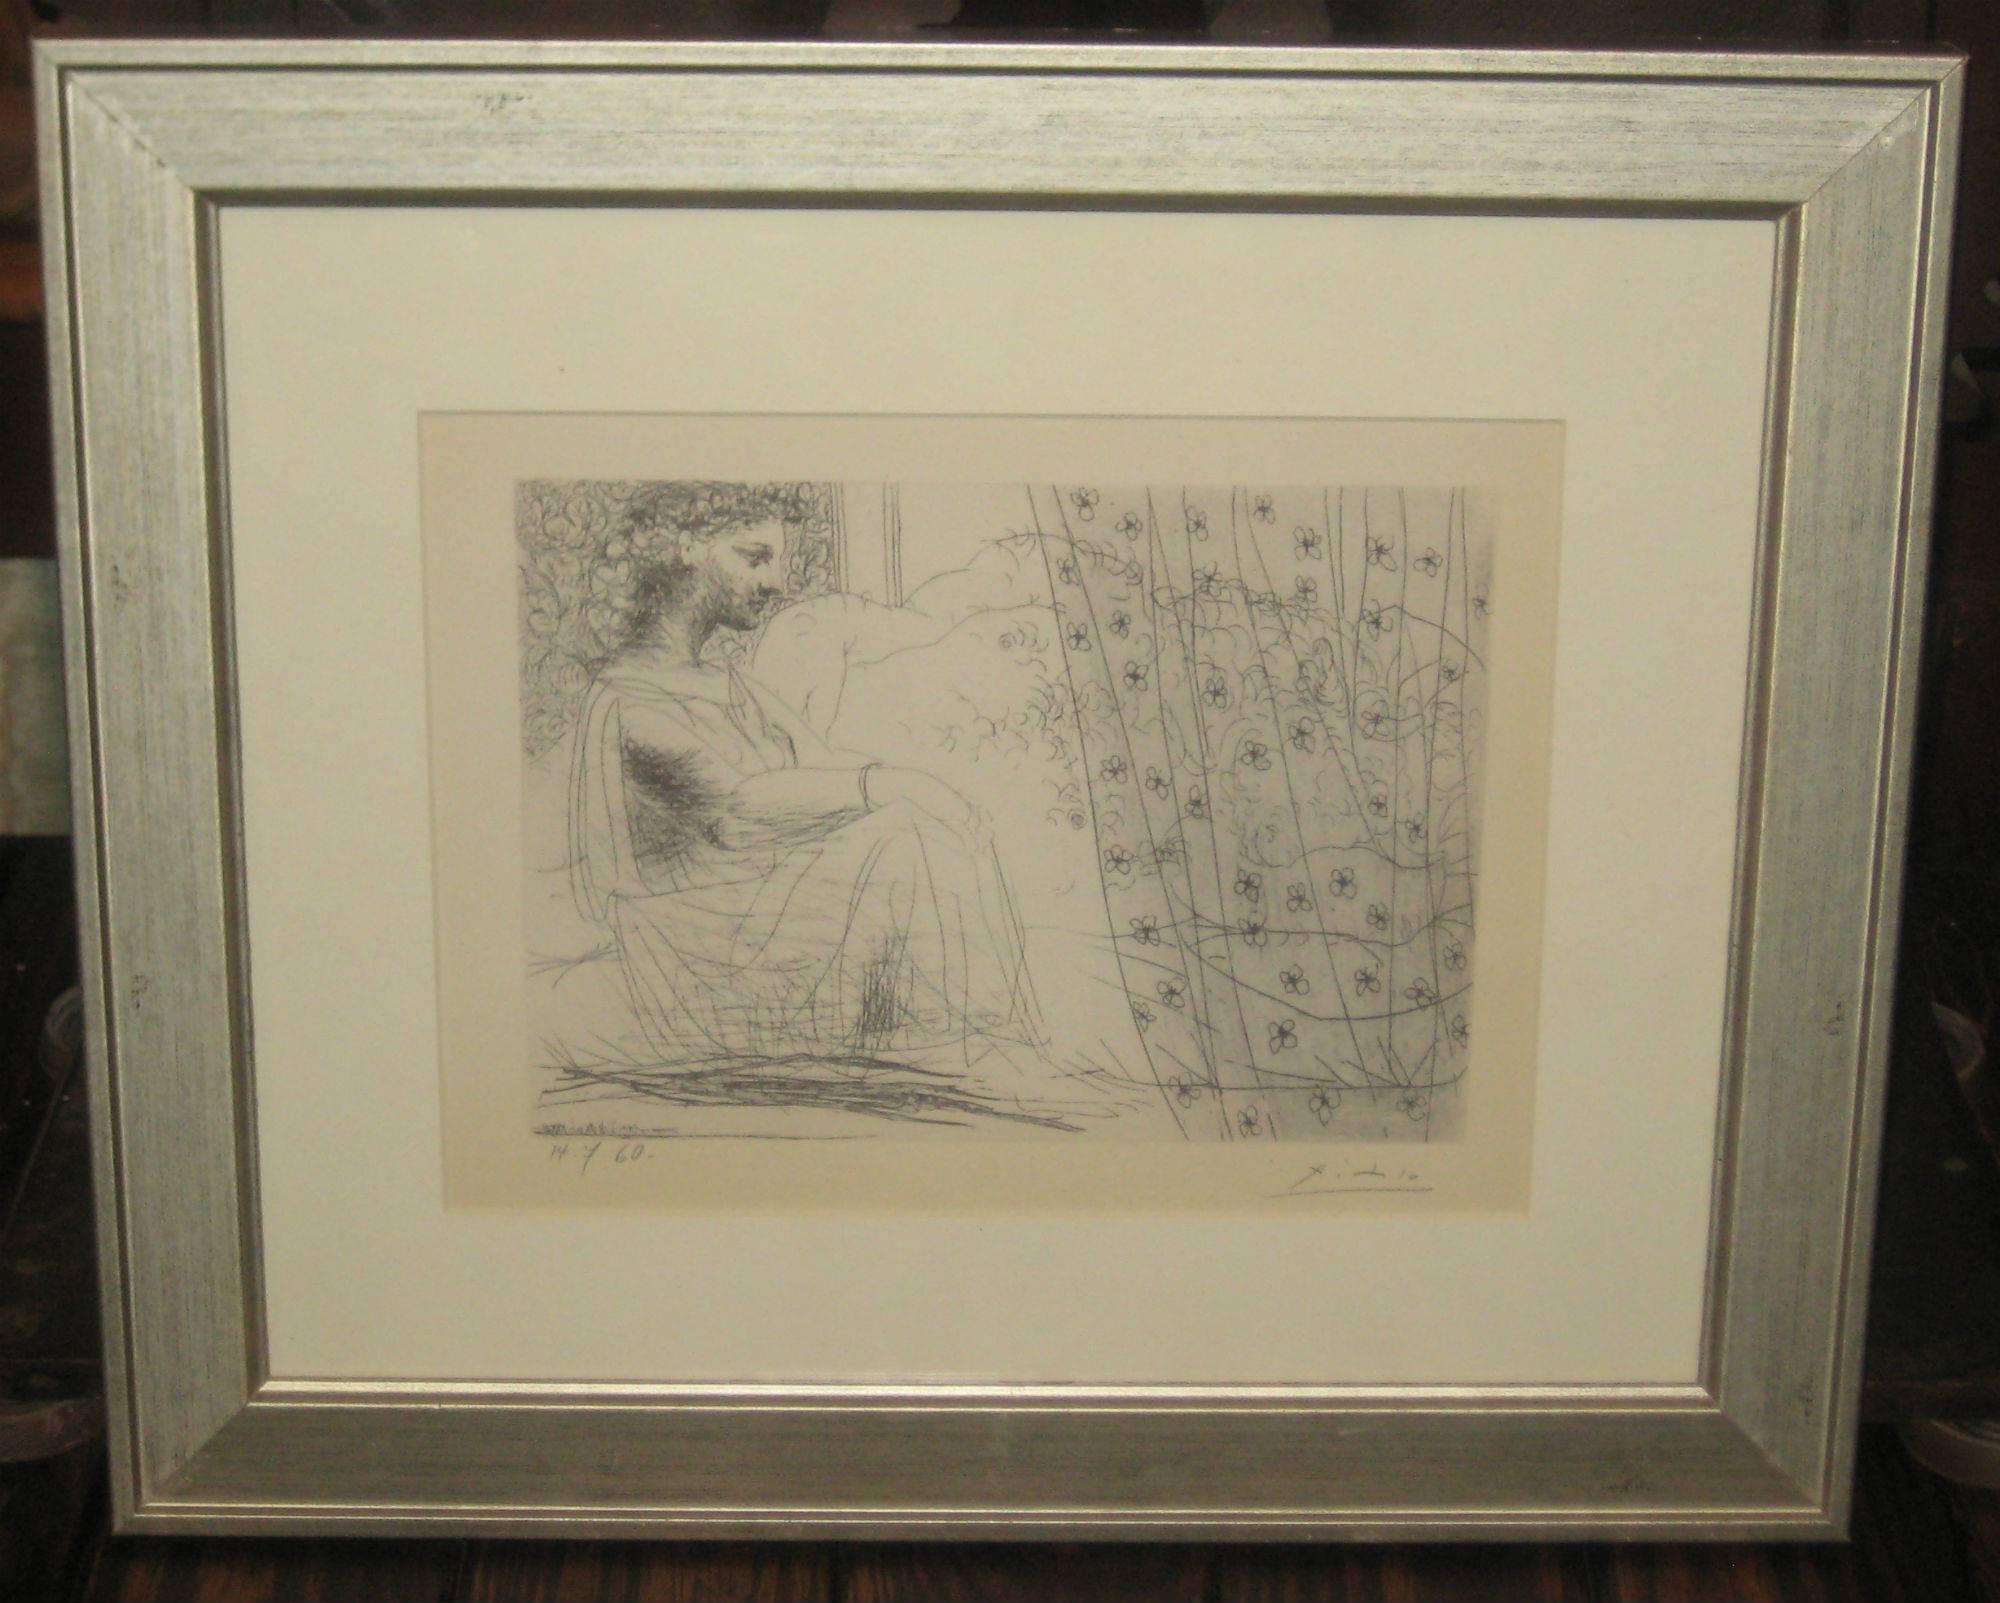 Pablo Picasso, 1881-1973, Suite Vollard, Bloch 193, original lithograph after the etching, edition of 25, hand signed in pencil lower right. Sight size: 7.5